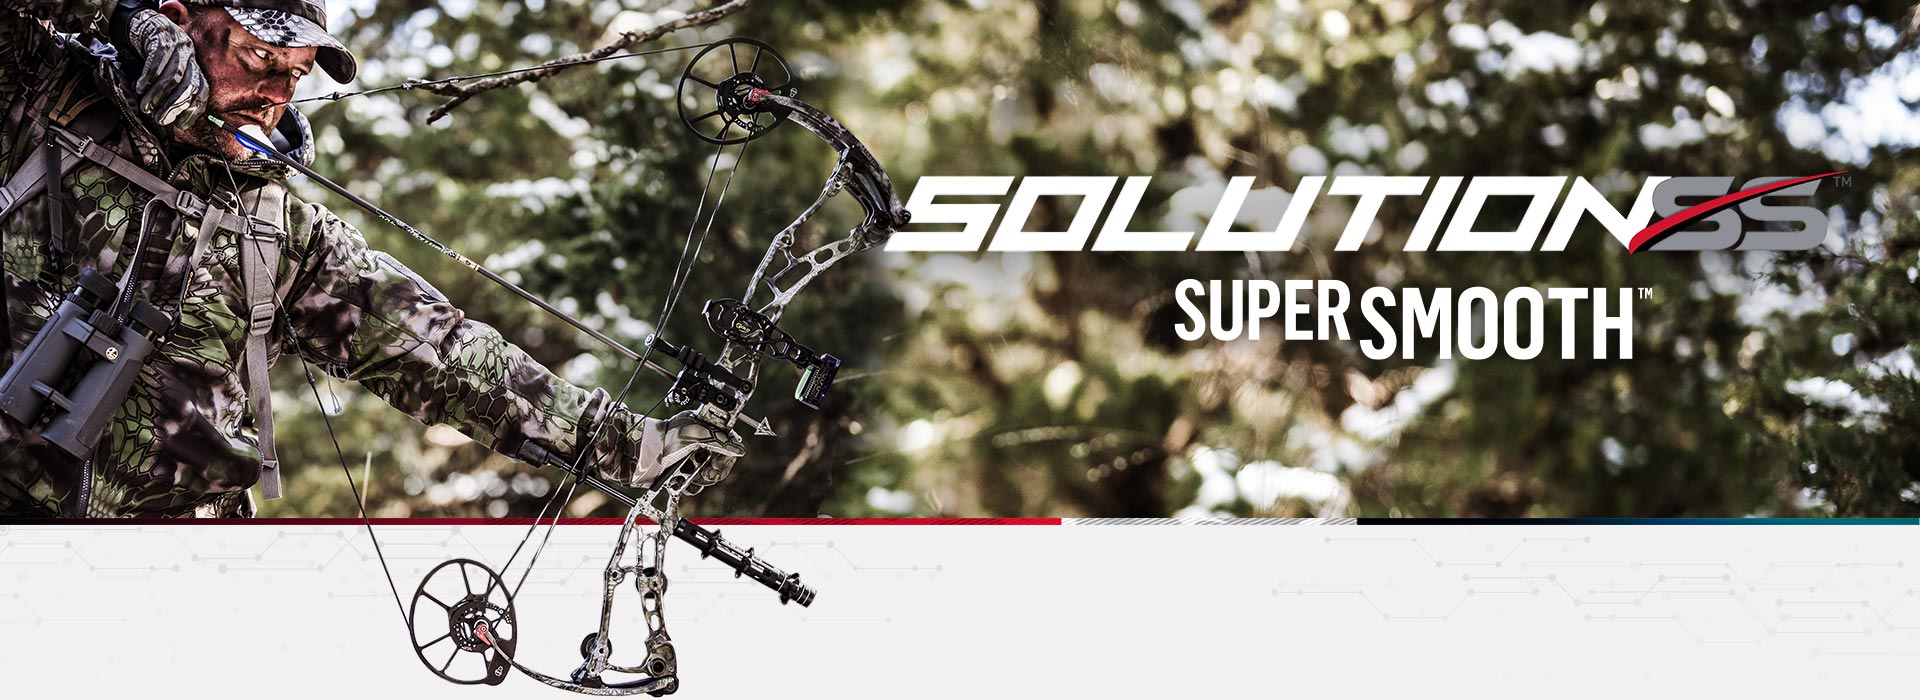 Bow hunter wearing camo clothes shooting a Bowtech Solution SS archery compound bow